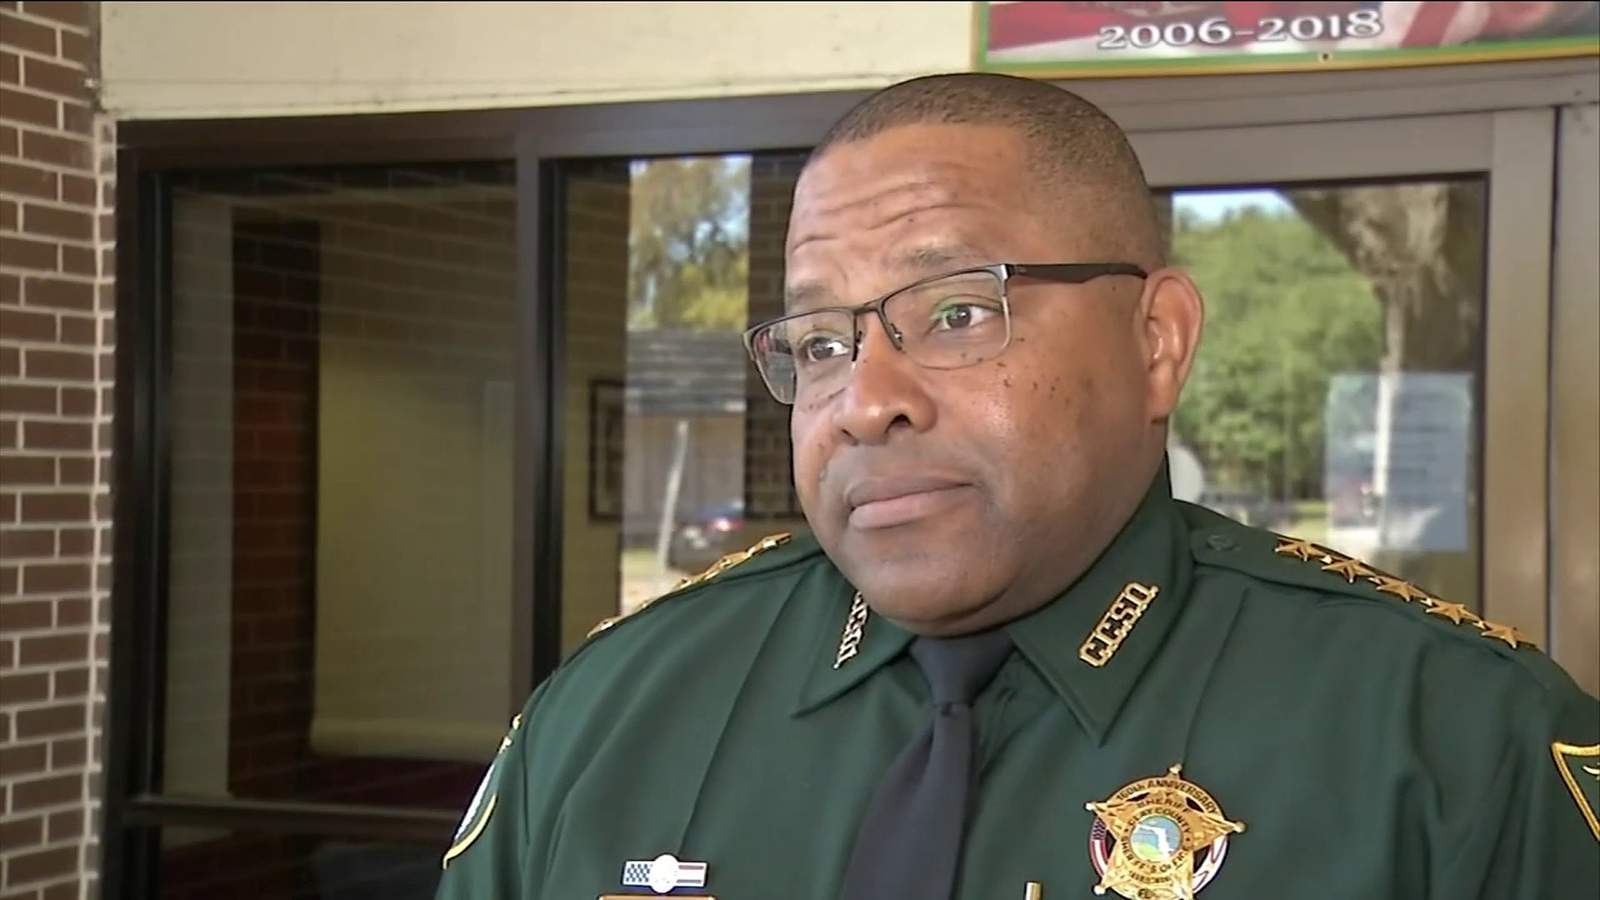 State attorney seeks independent prosecutor for investigation into Clay County sheriff